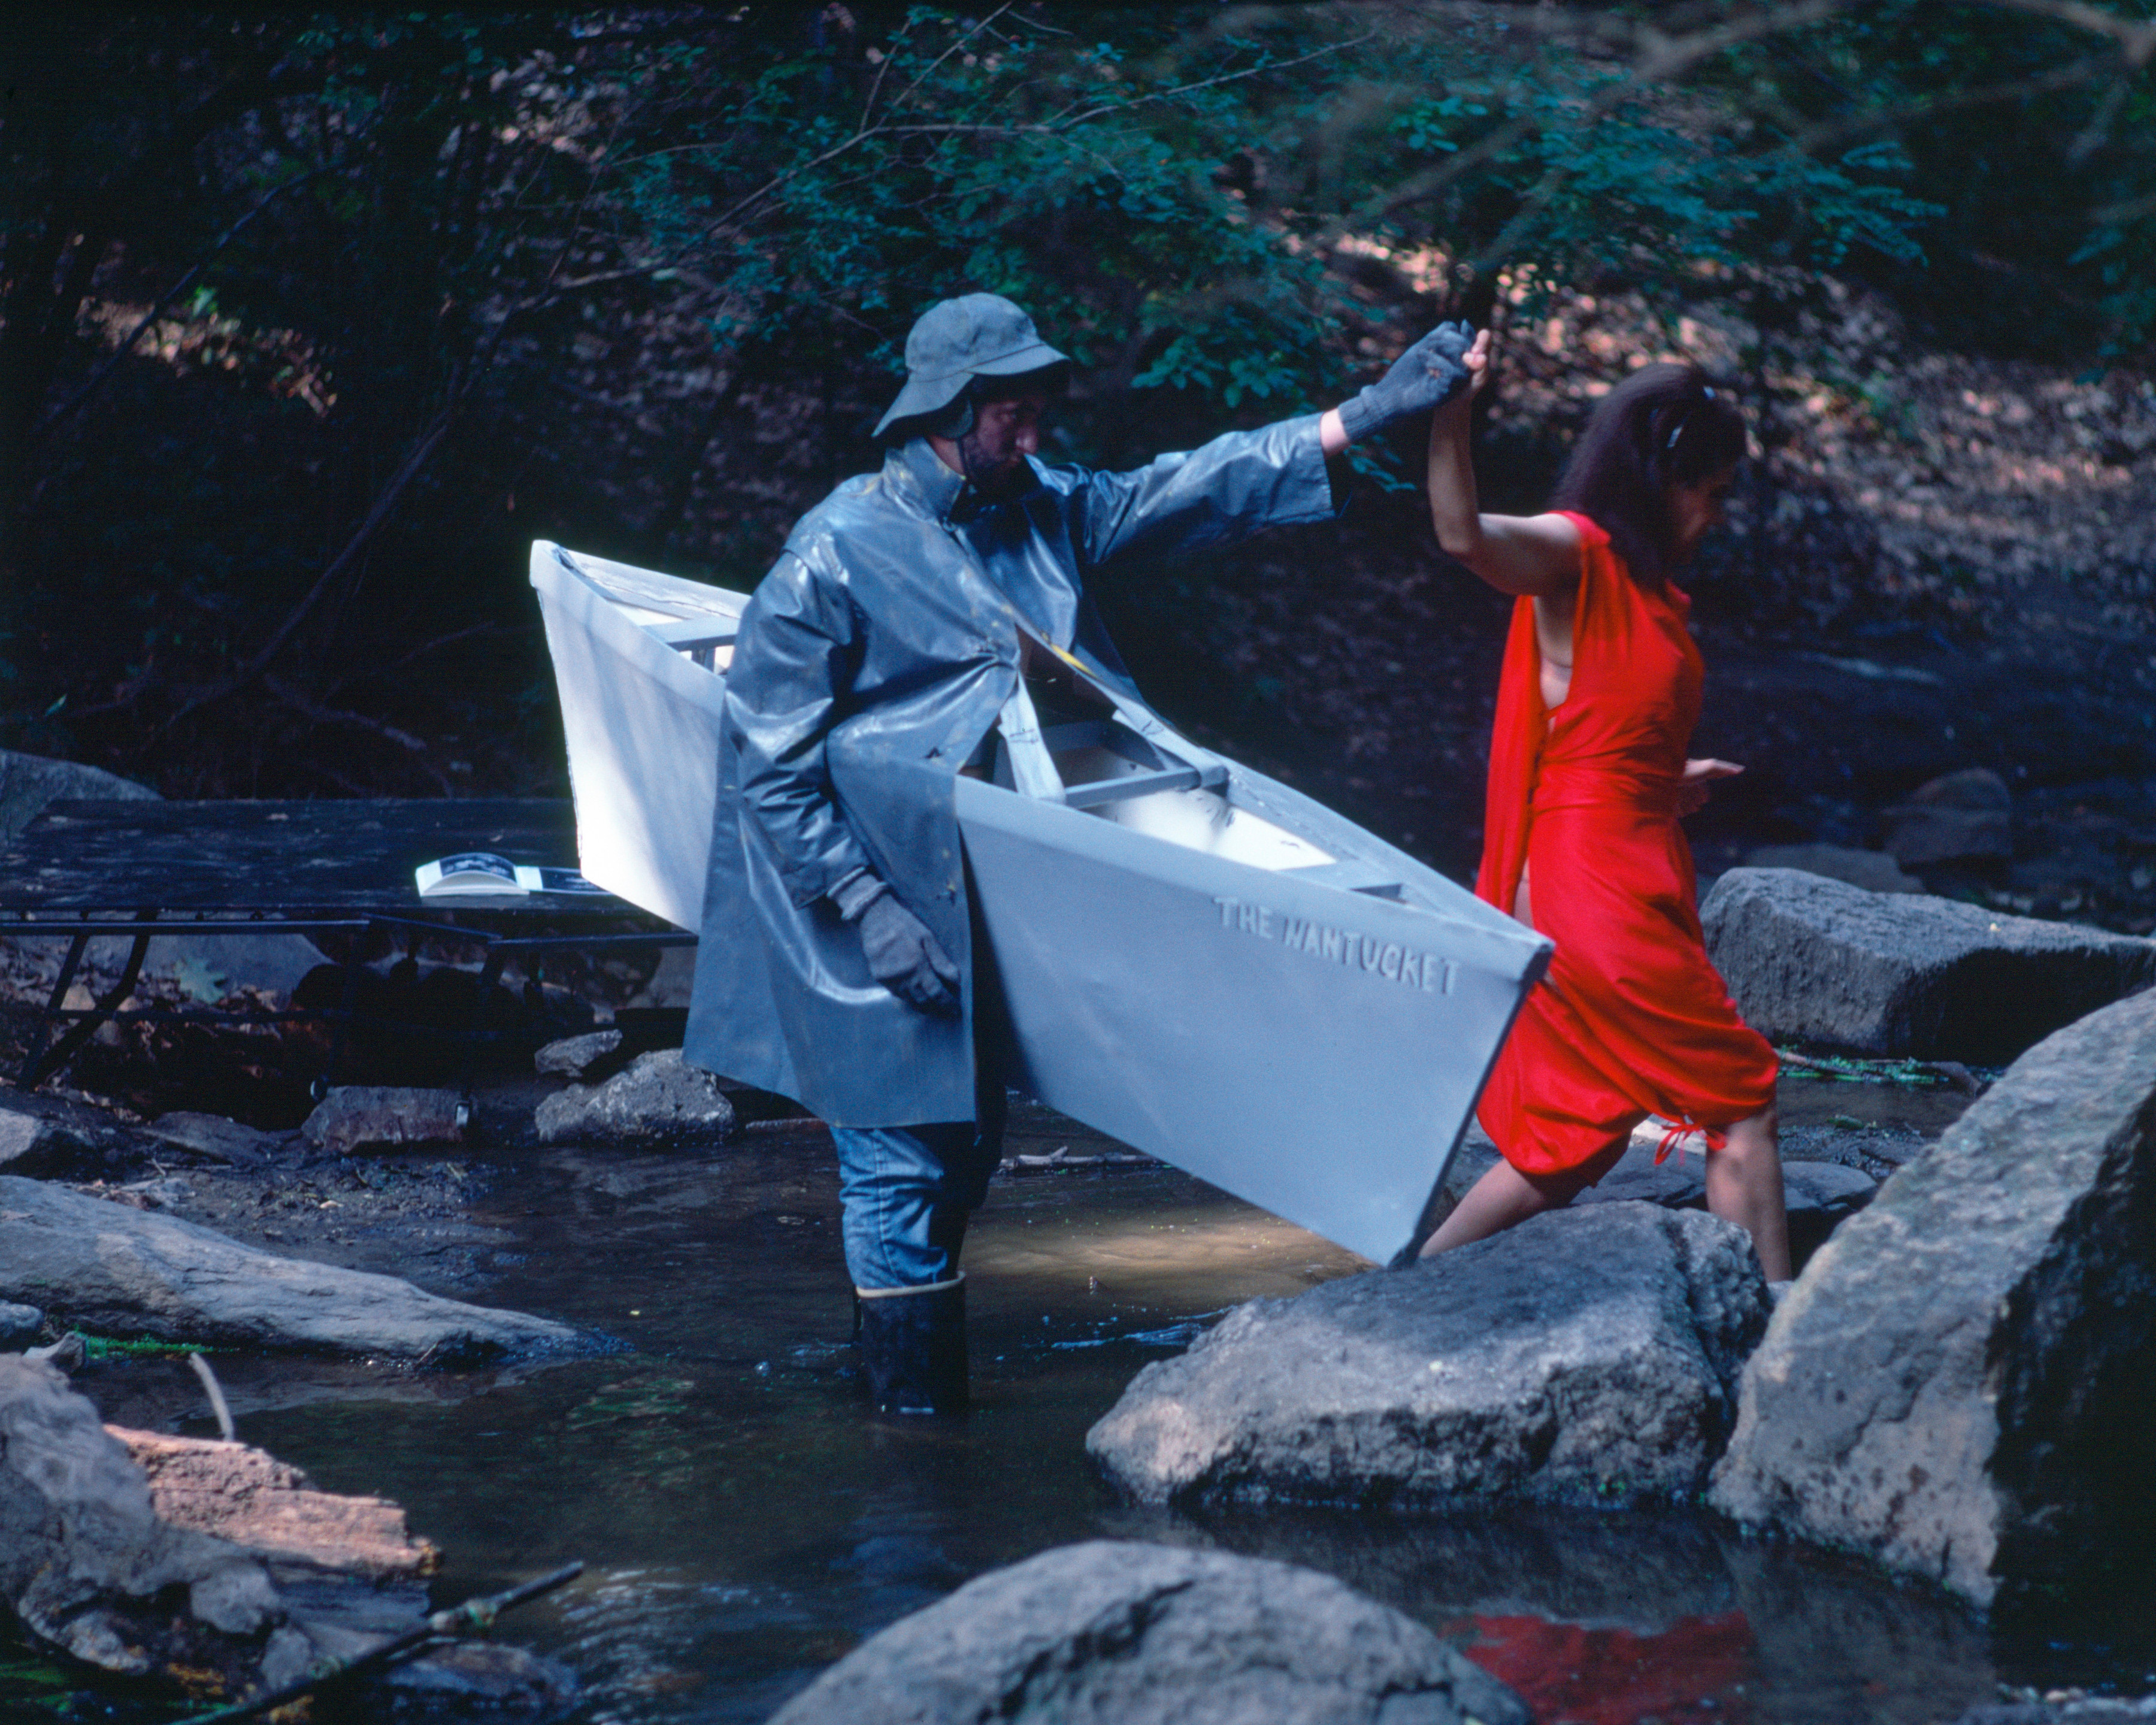 Lorraine O&#039;Grady, Rivers, First Draft: The Nantucket Memorial guides the Woman in Red to the other side of the stream, 1982/2015